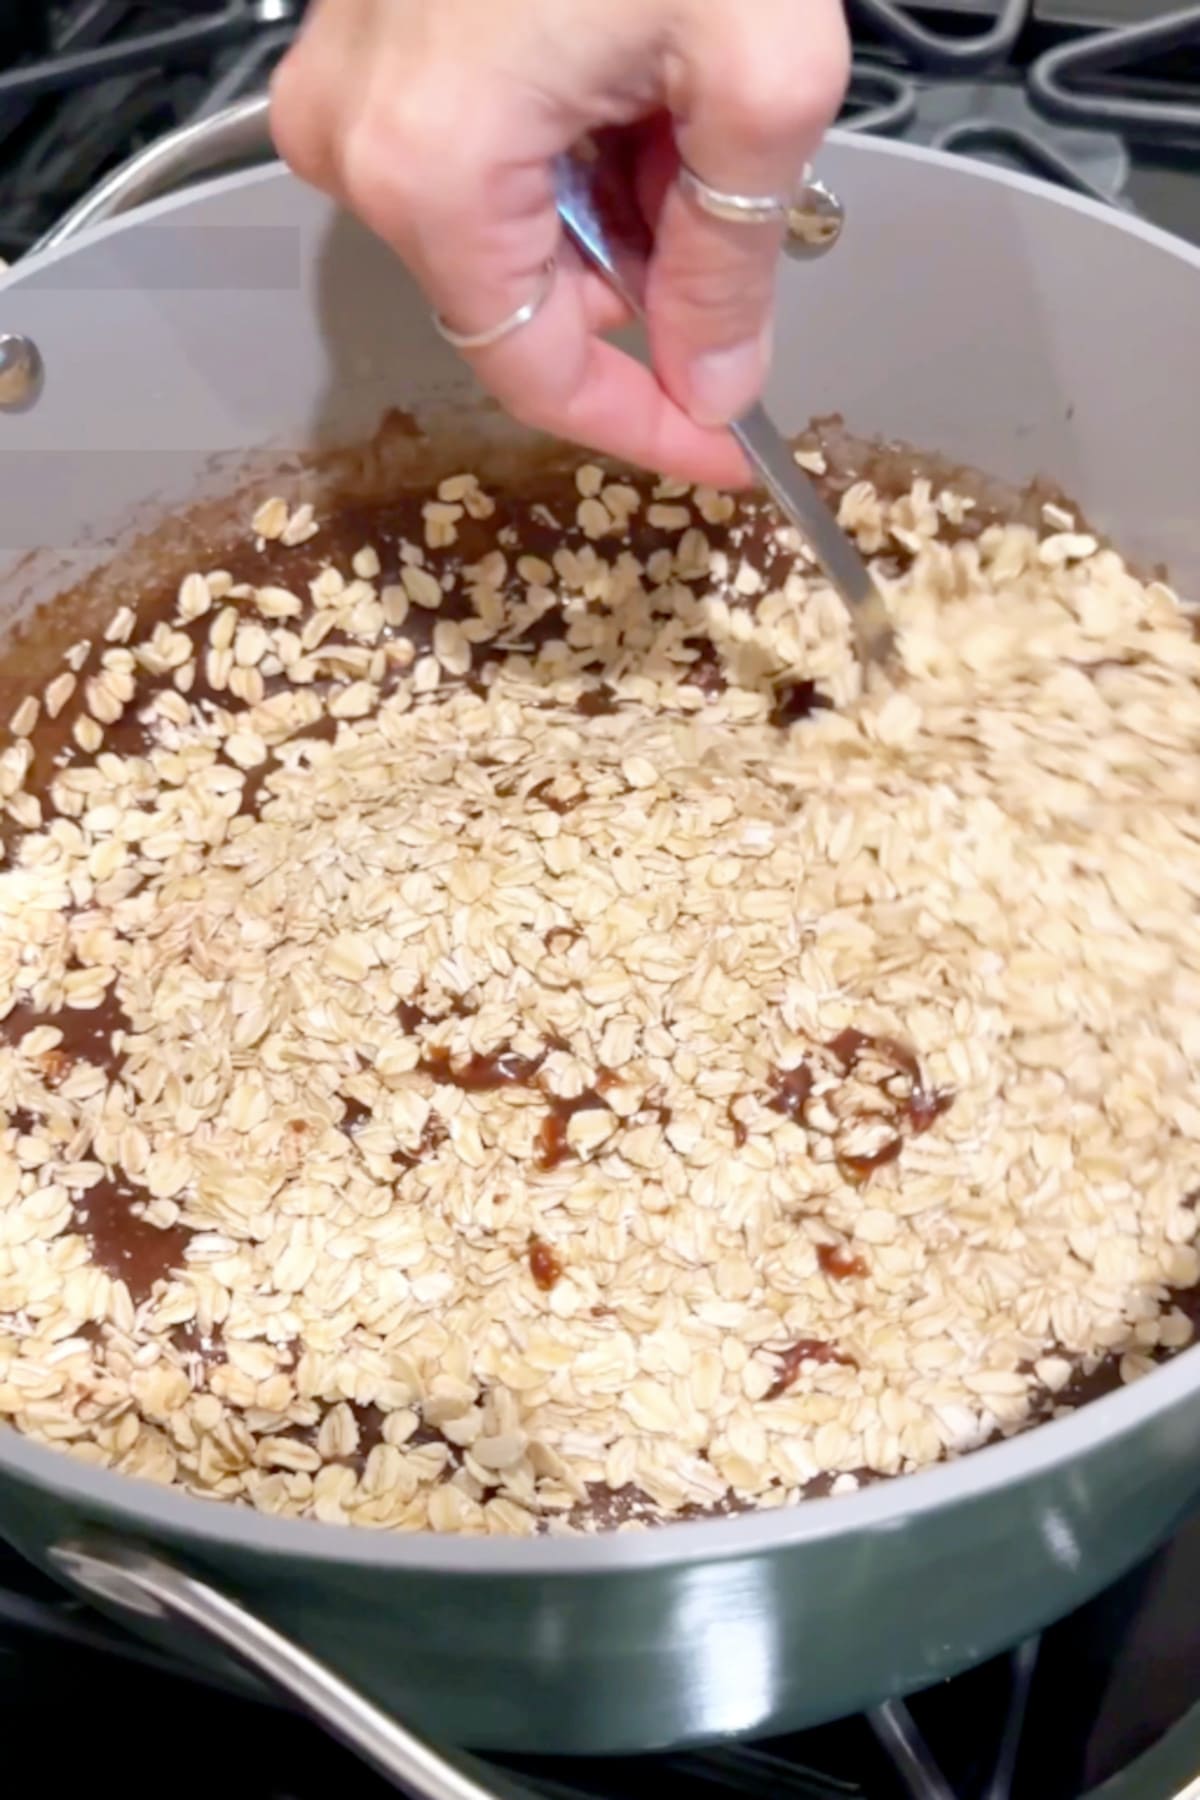 A hand using a spoon to stir the rolled oats into the cacao mixture in the pan.